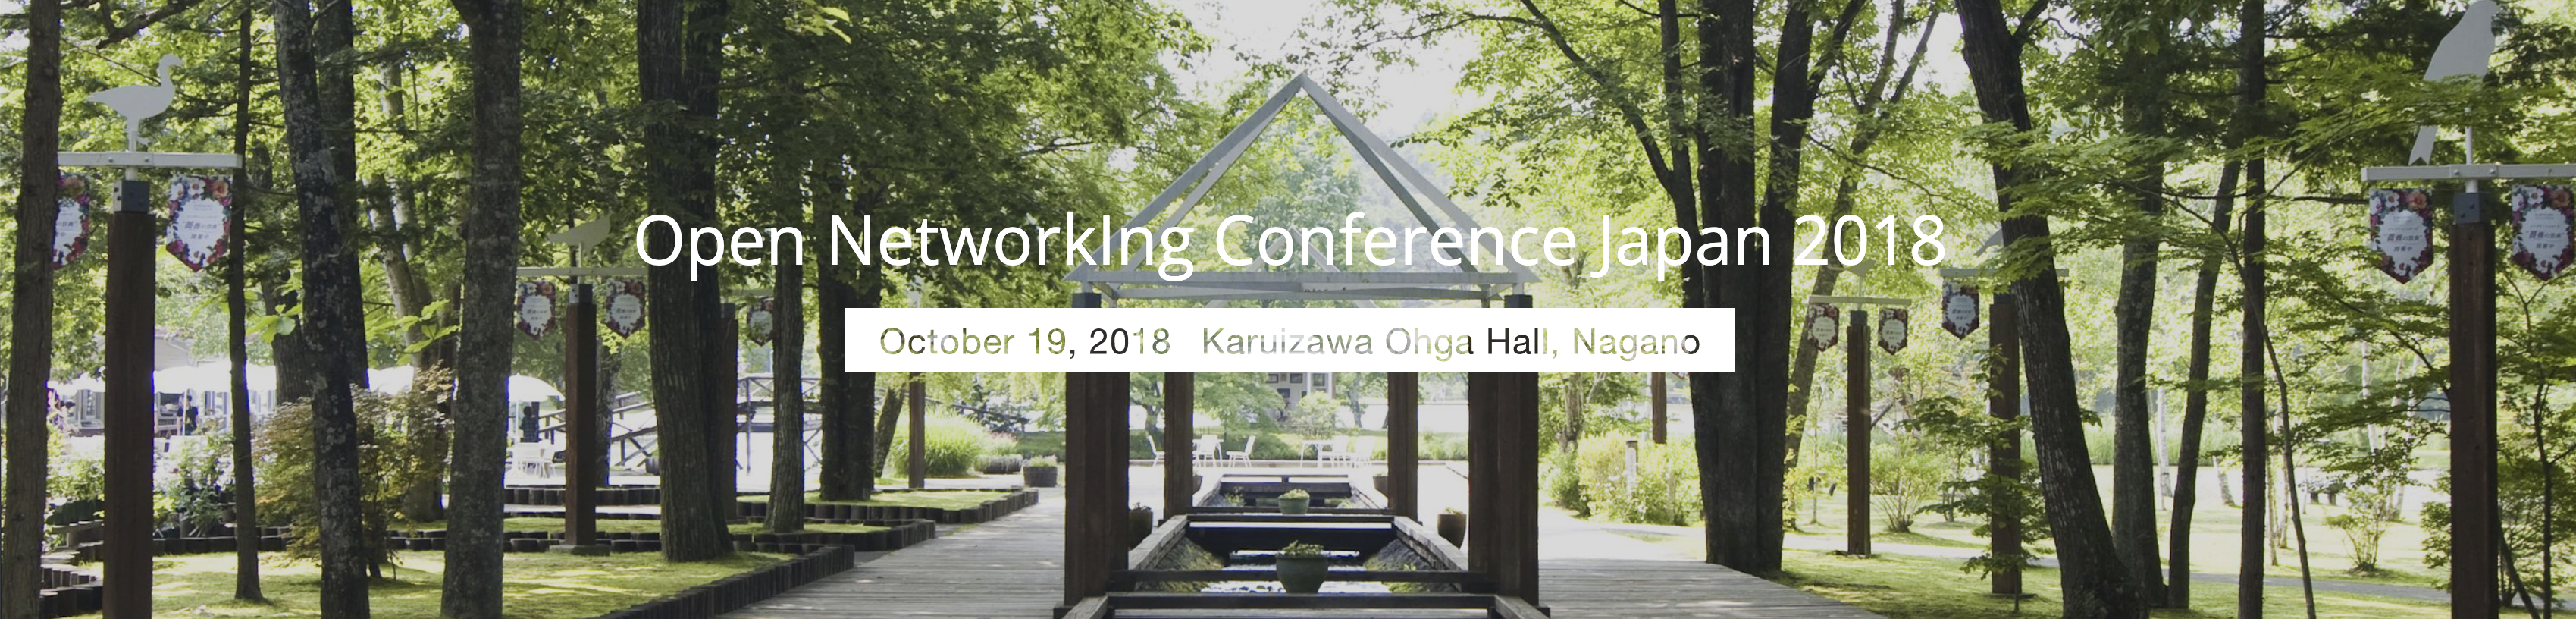 Open NetworkIng Conference Japan 2018 参加登録開始